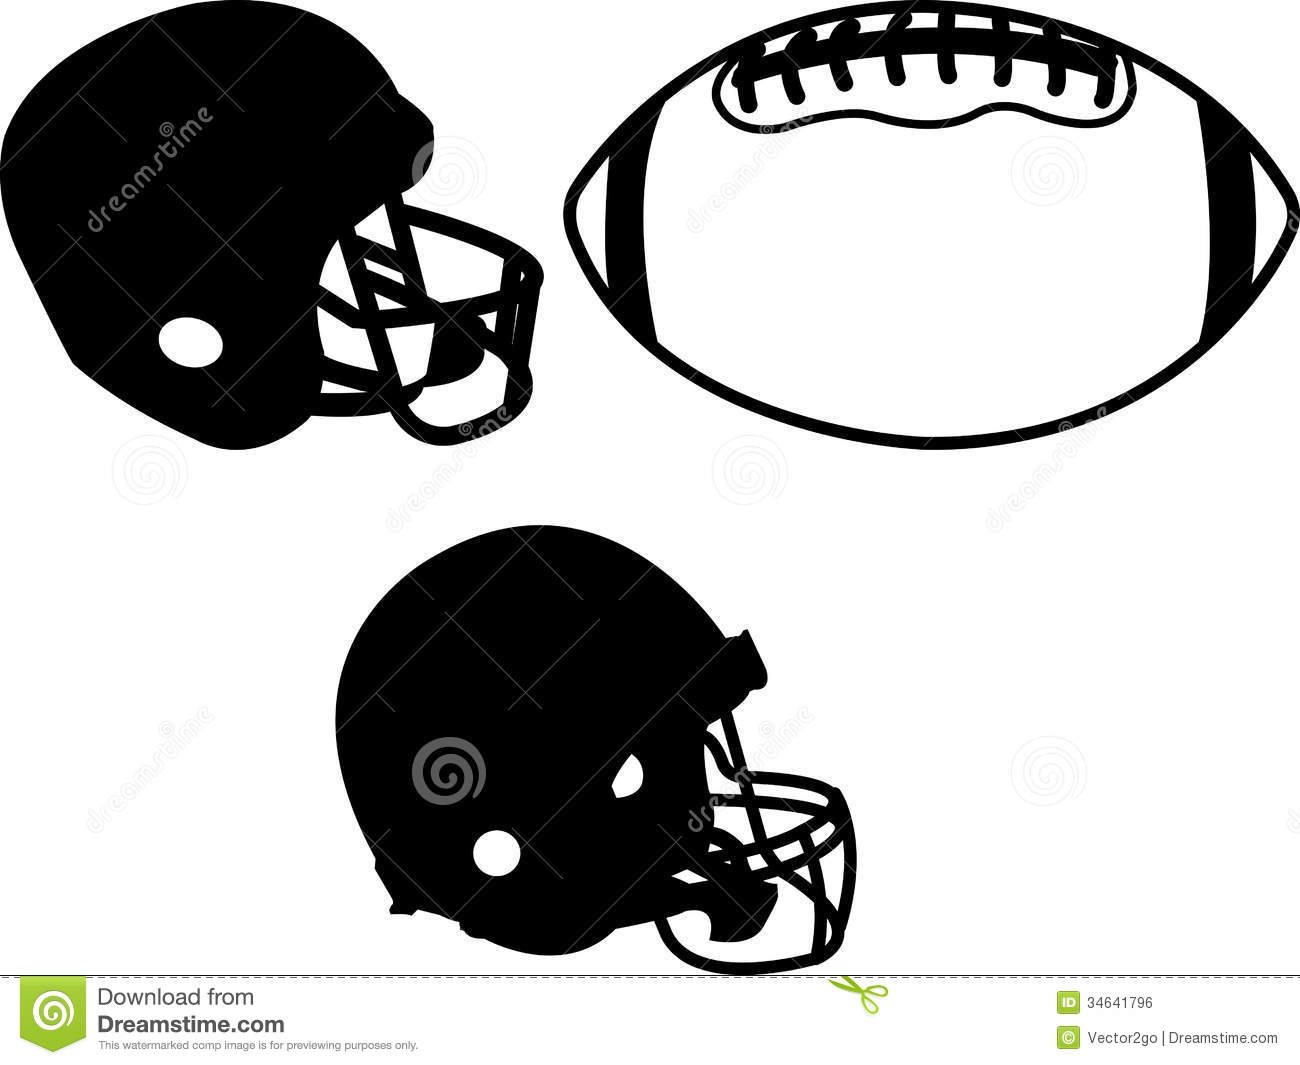 Football Helmets And Ball In Black And White Silhouette 